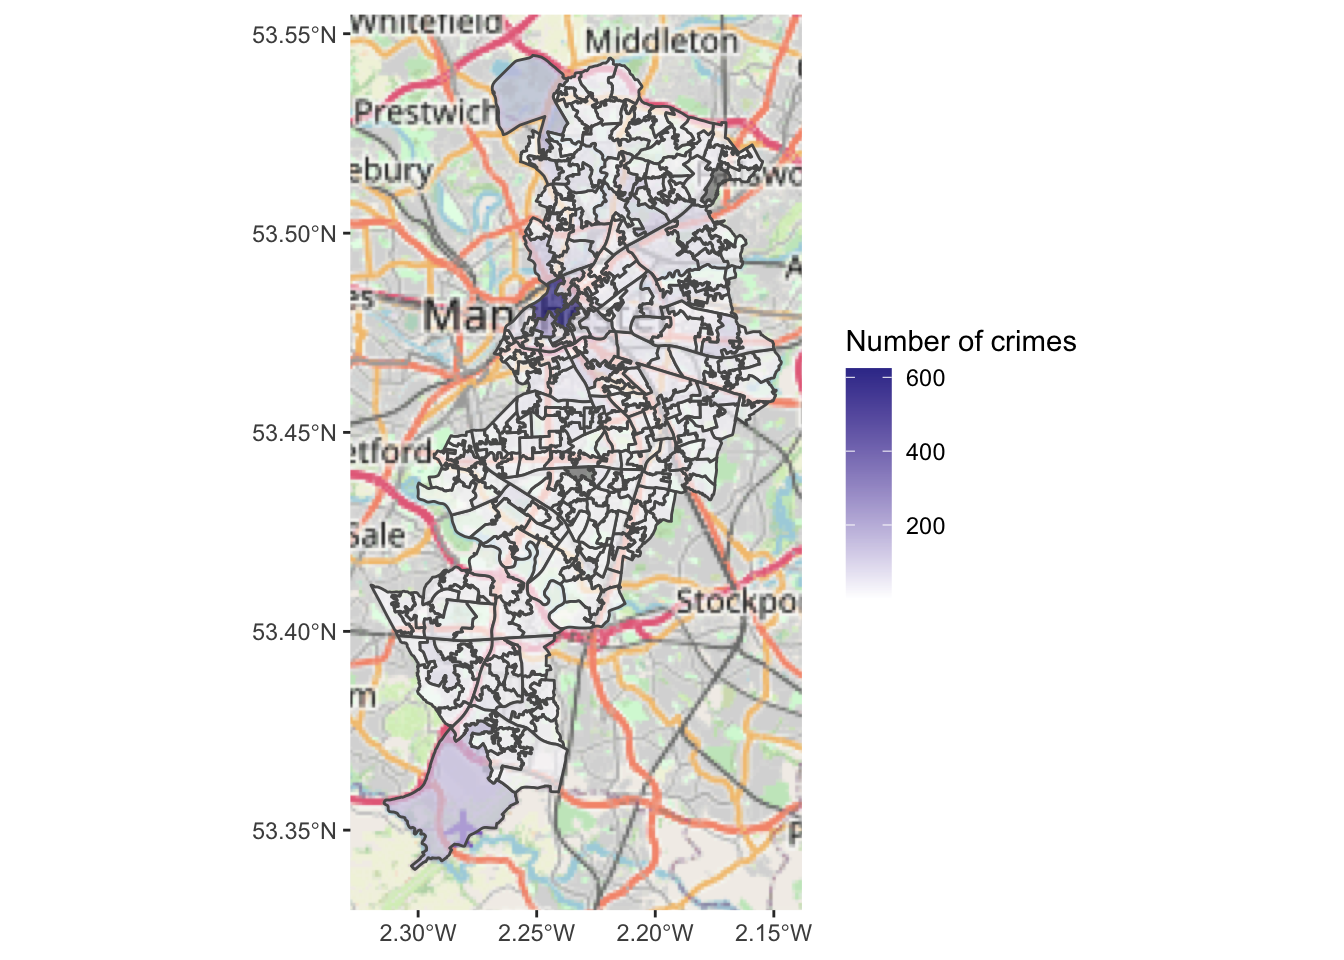 The previous plot overlaid on a map of Manchester. The gradient has been inverted, with lighter colours denoting lower number of crimes, and darker blue more. The label of the gradient is now 'Number of crimes'.